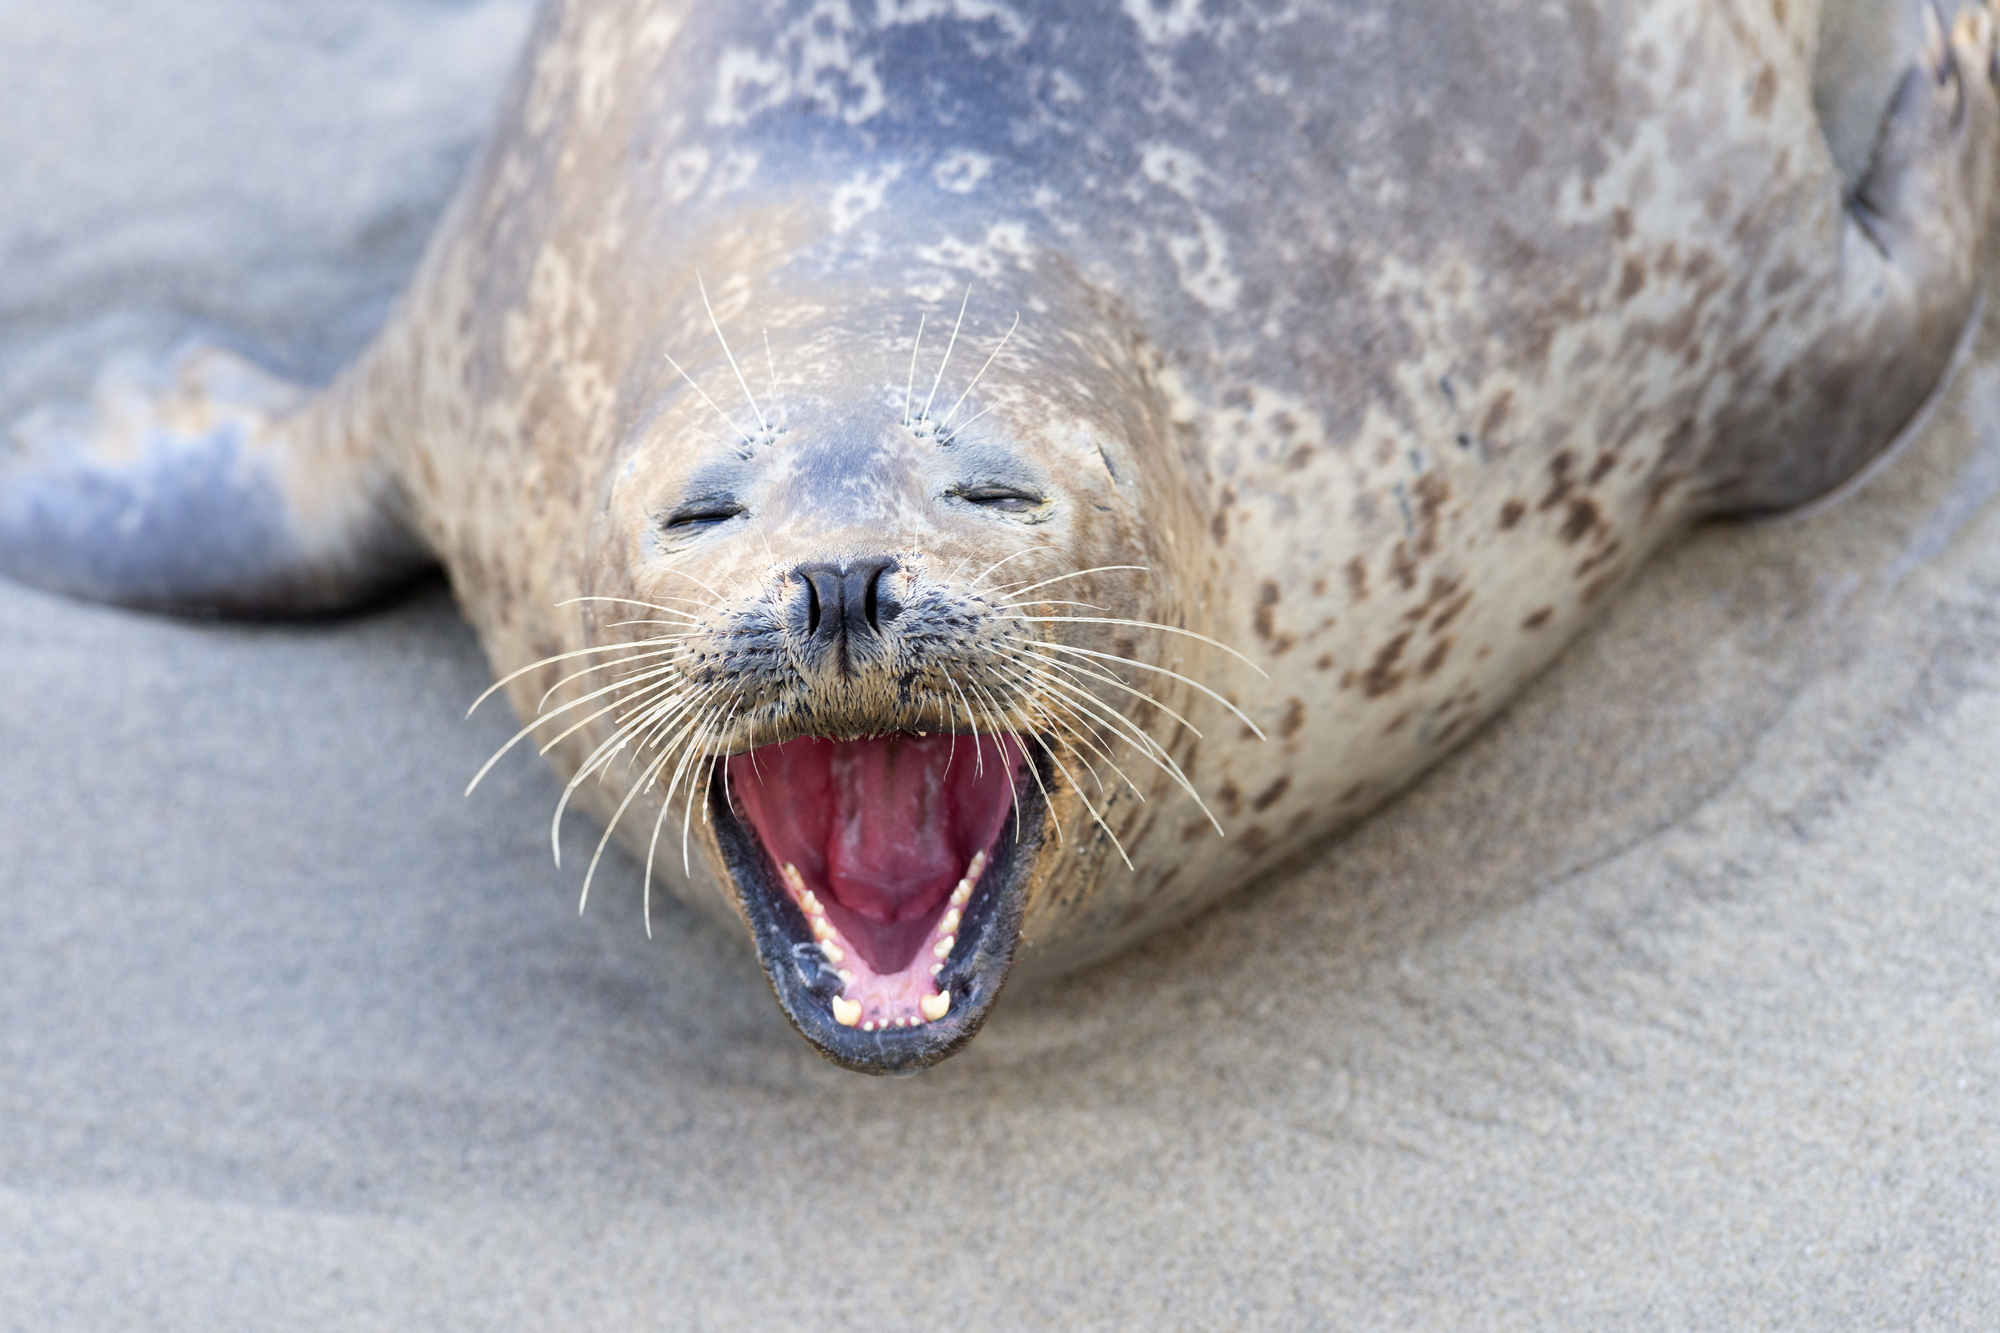 seal laying on beach showing teeth as an example of stress behavior